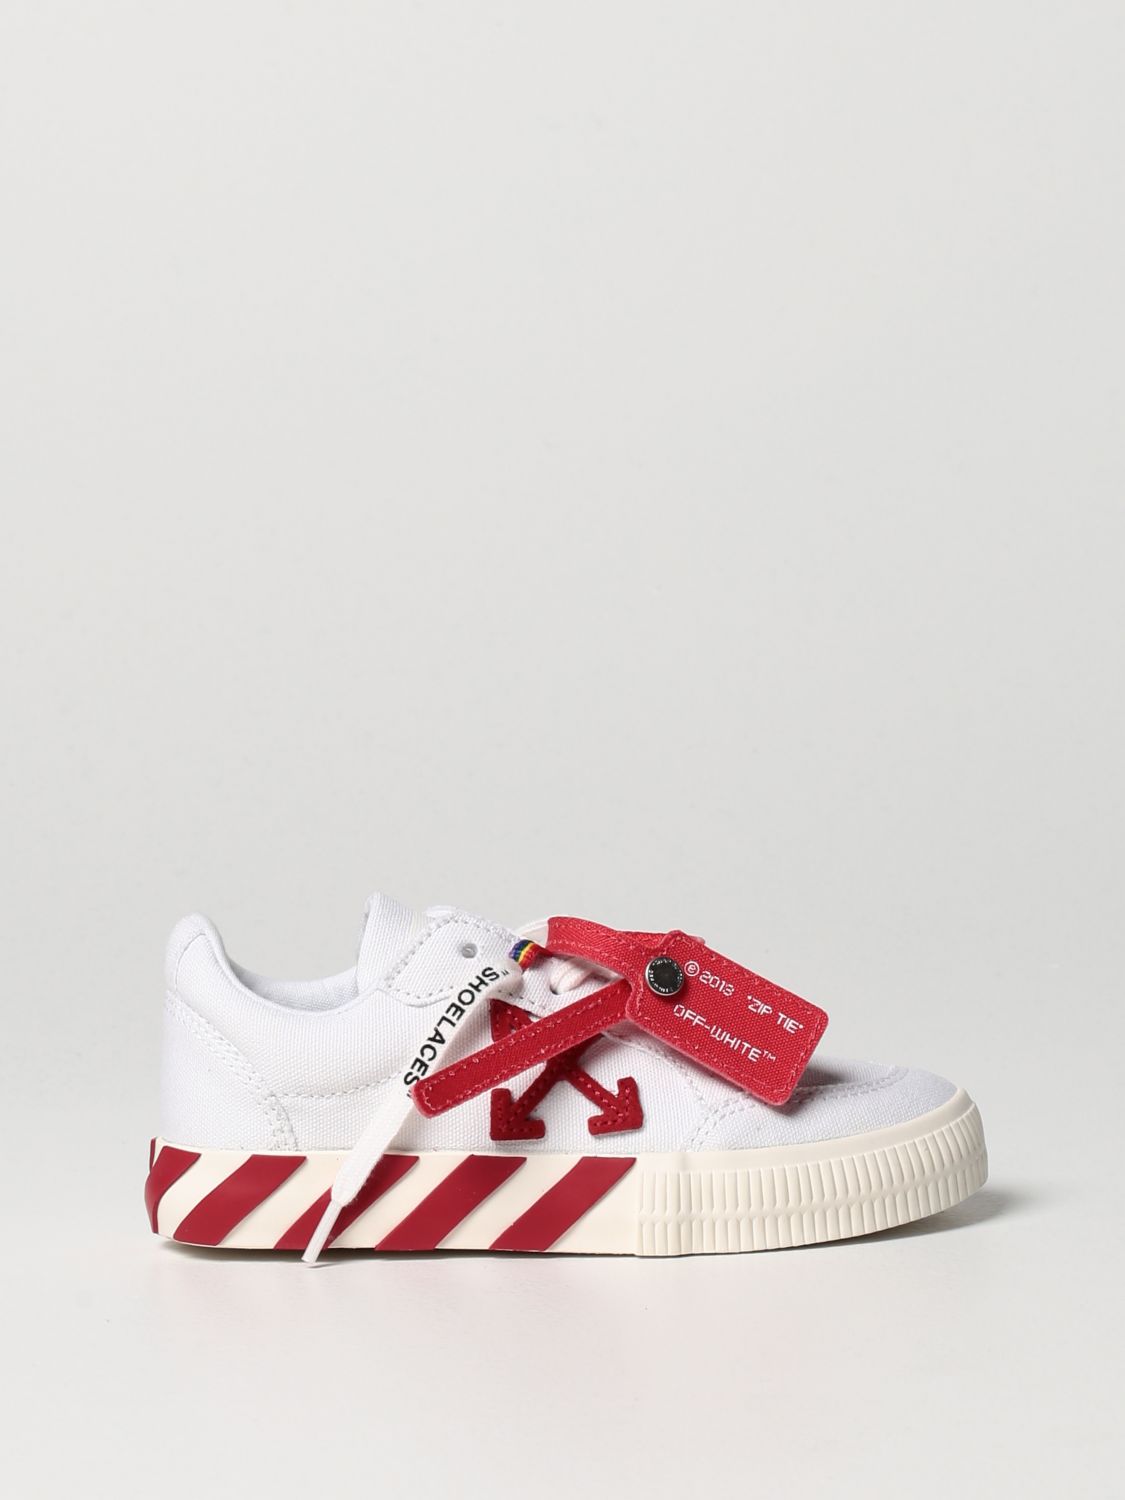 rooster Avonturier kroon OFF-WHITE: shoes for girls - White | Off-White shoes OGIA001F21FAB001  online on GIGLIO.COM